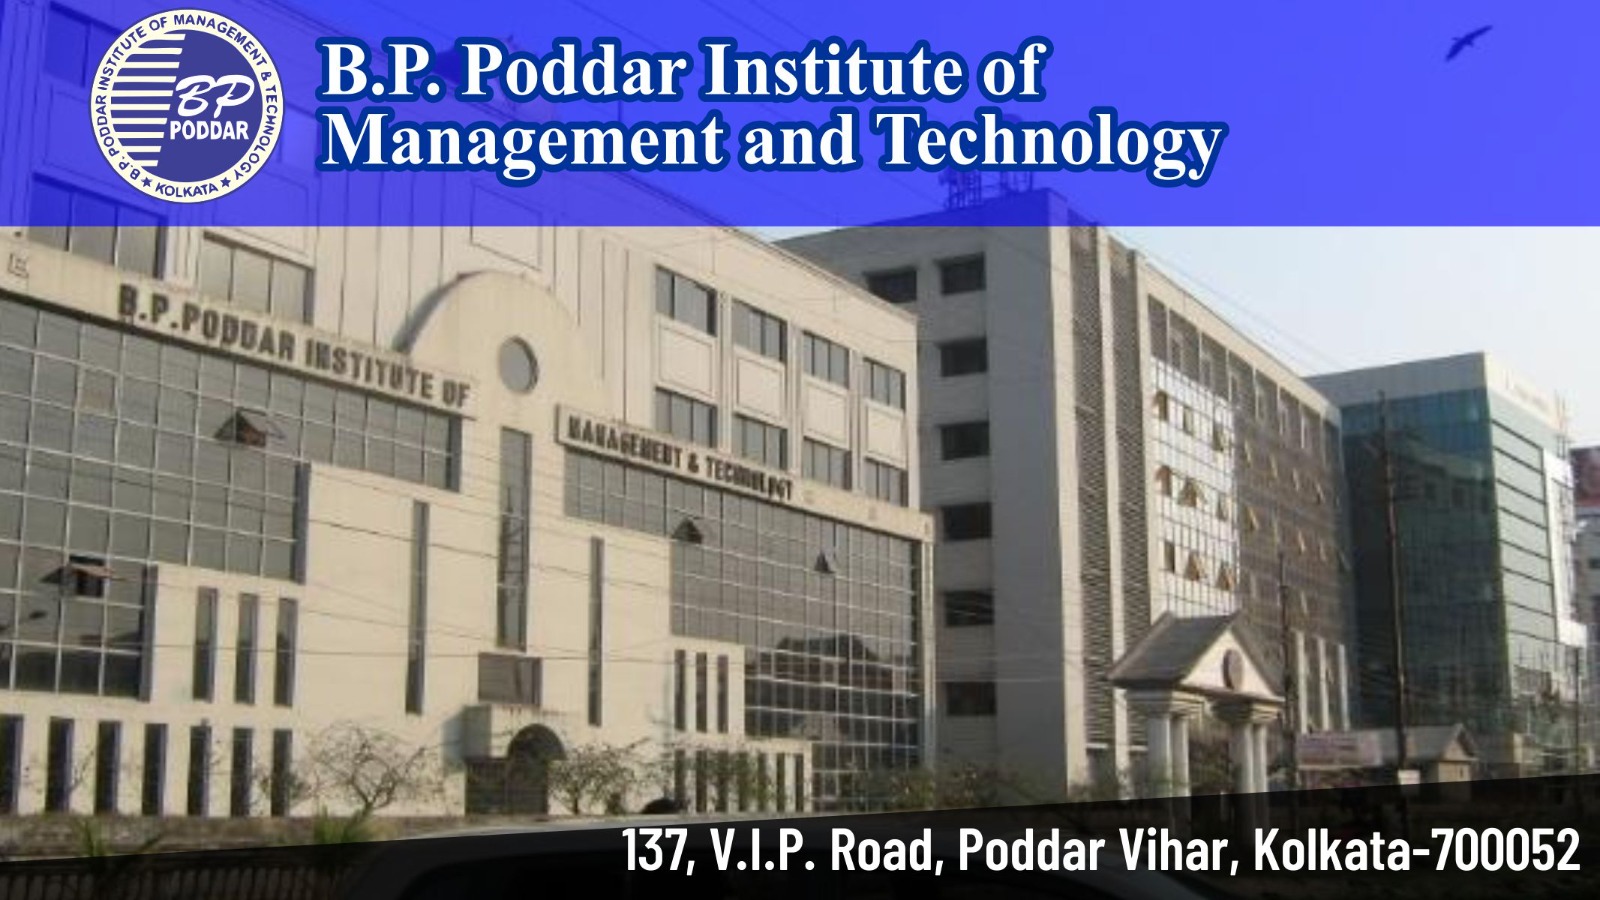 Out Side View of B.P. Poddar Institute of Management and Technology